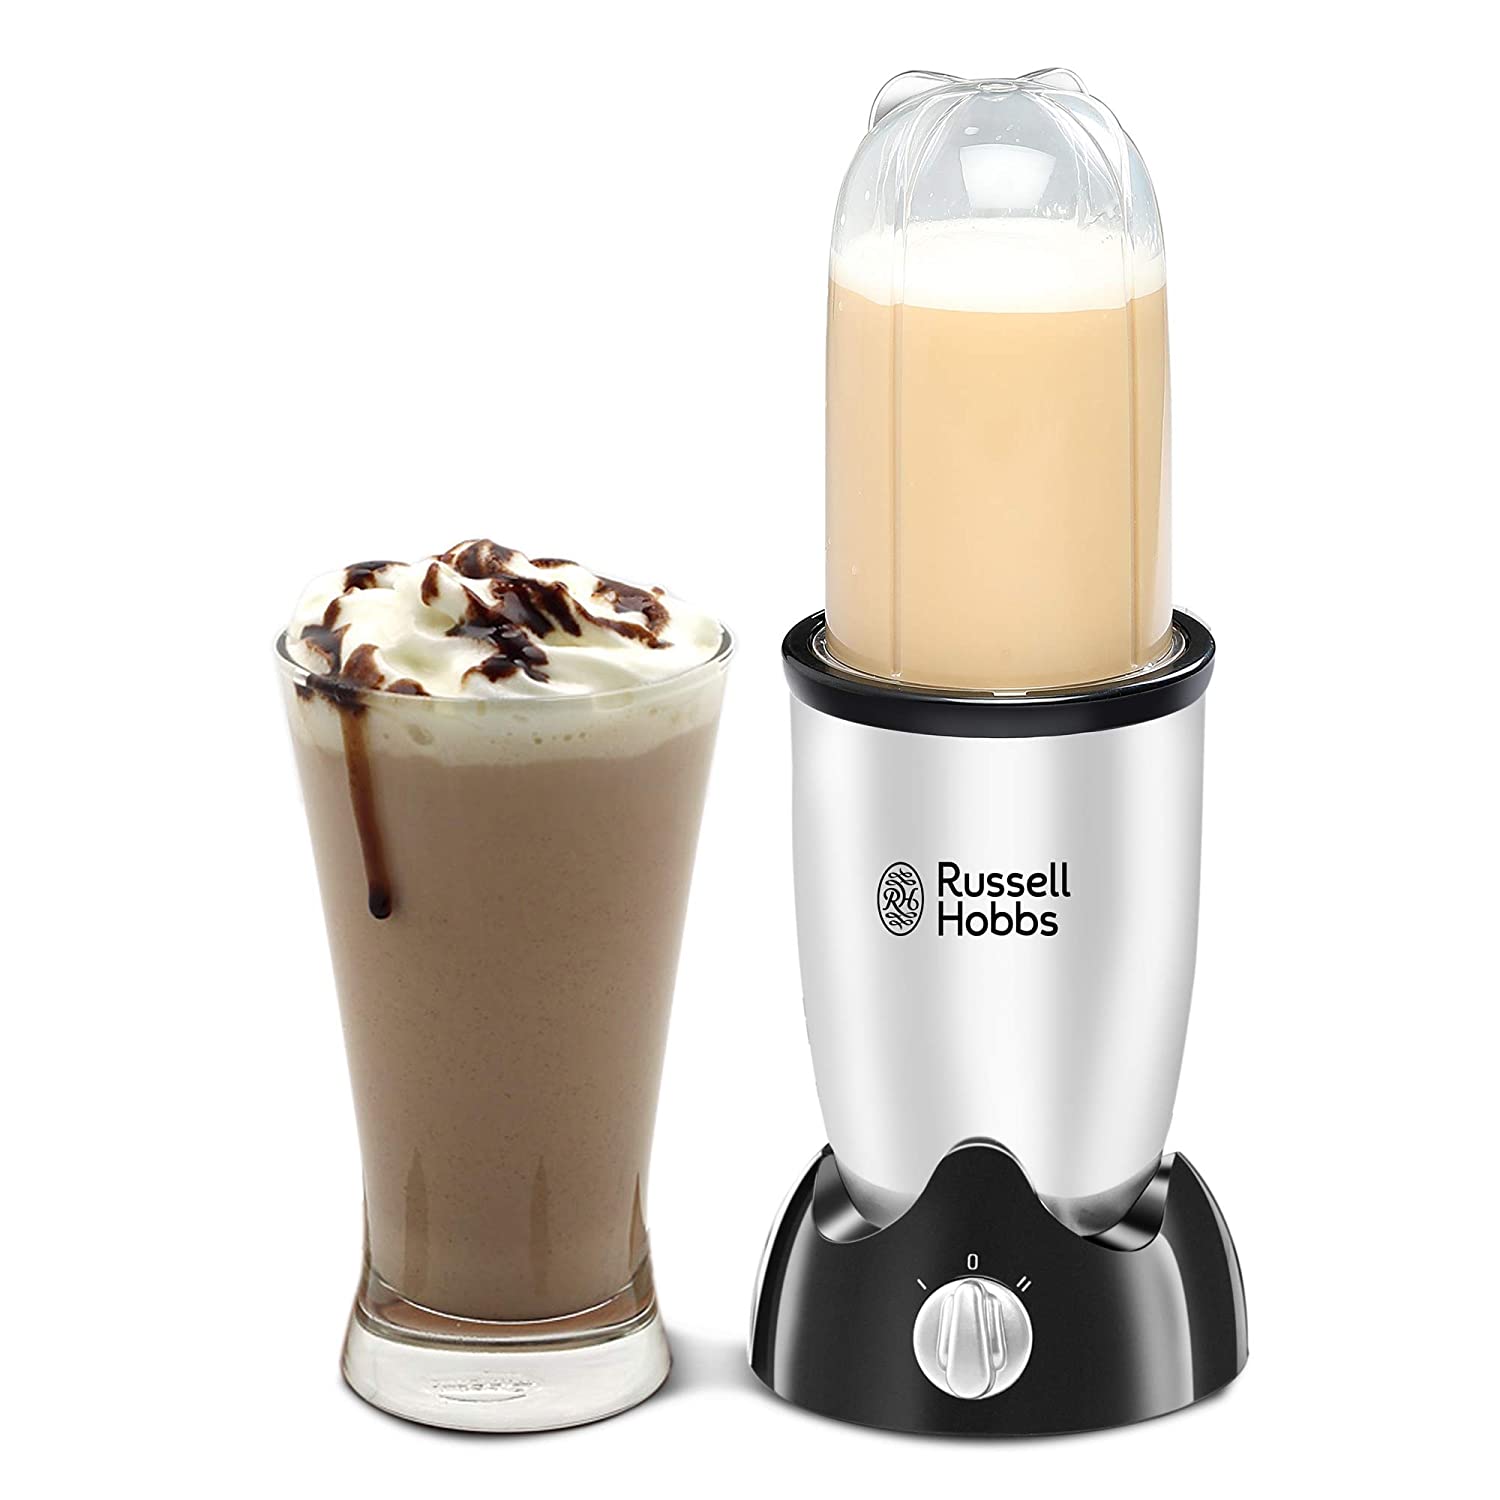 Russell Hobbs Health Blender/Mixer/Smoothie Maker Rhb300 at Rs